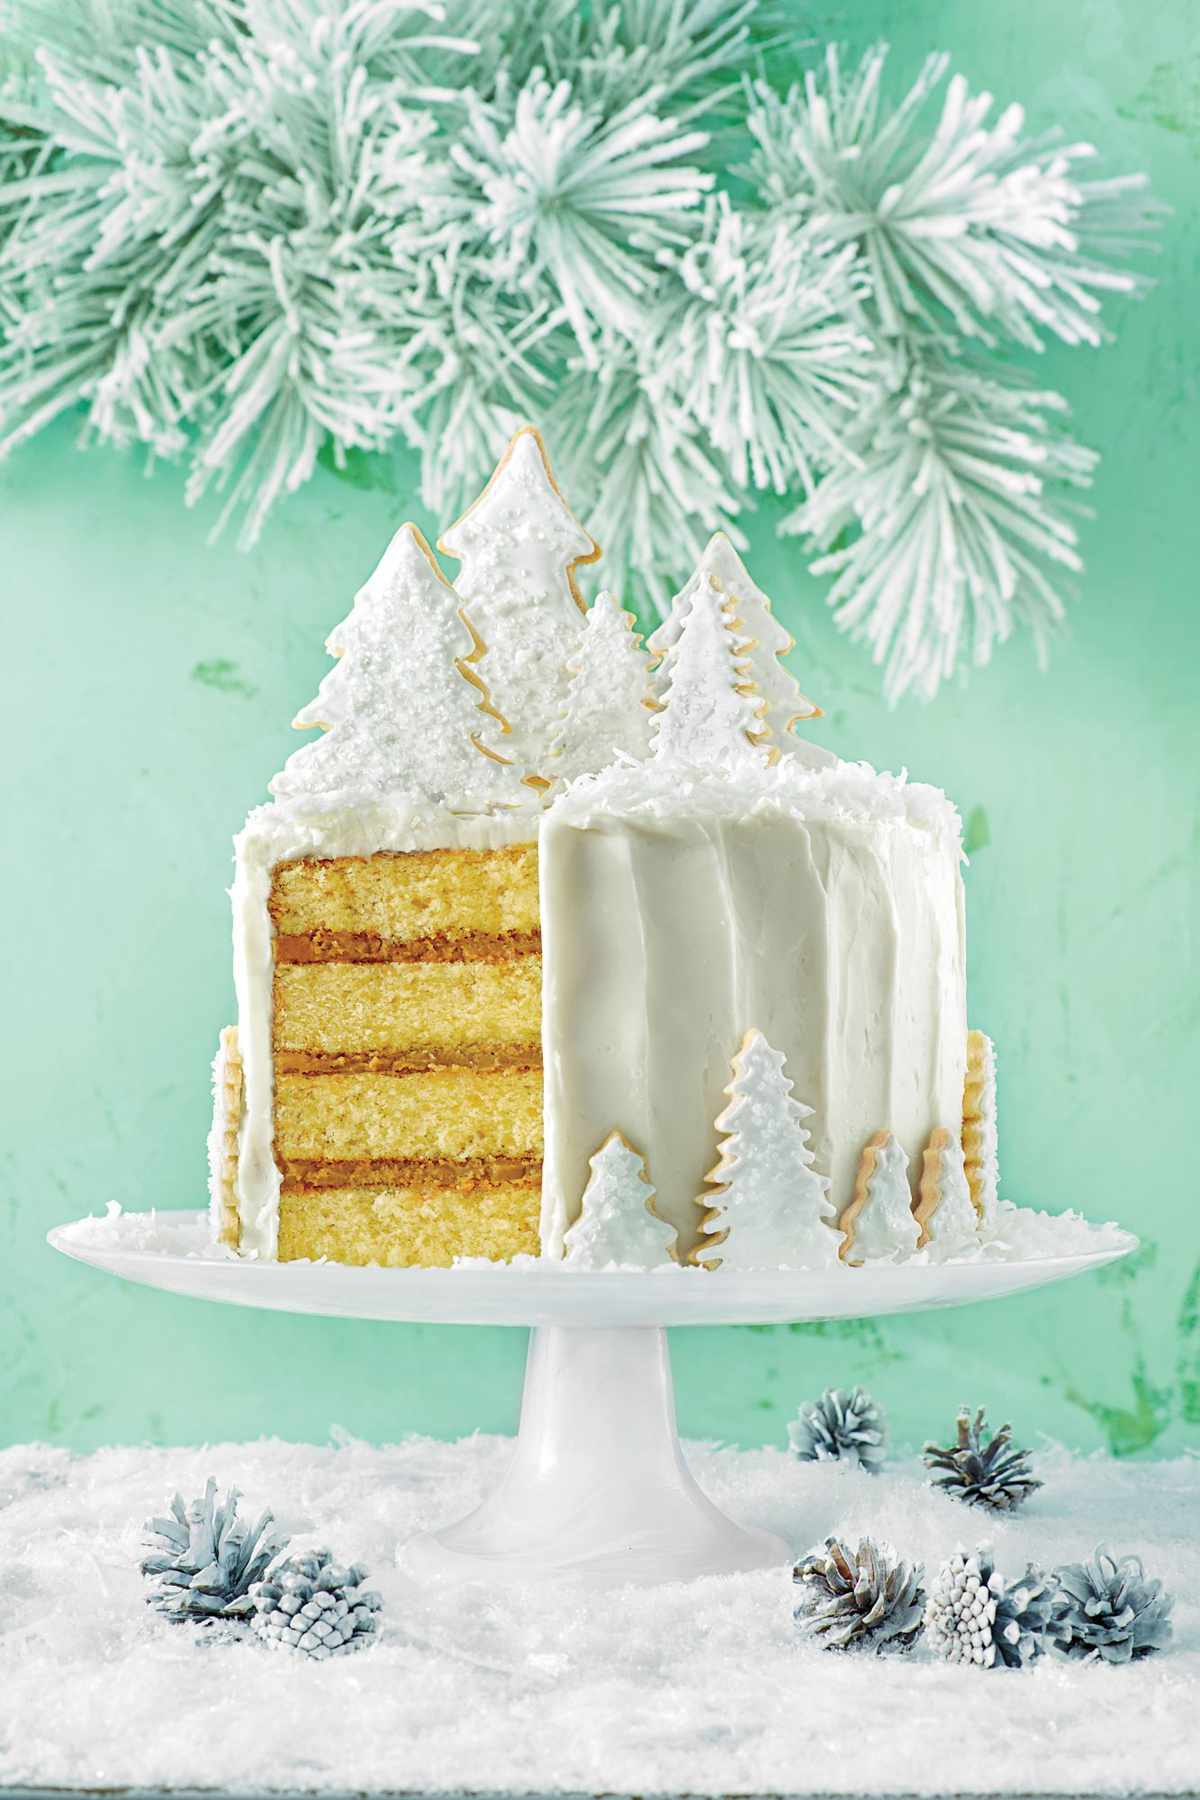 Coconut Cake with Rum Filling and Coconut Ermine Frosting